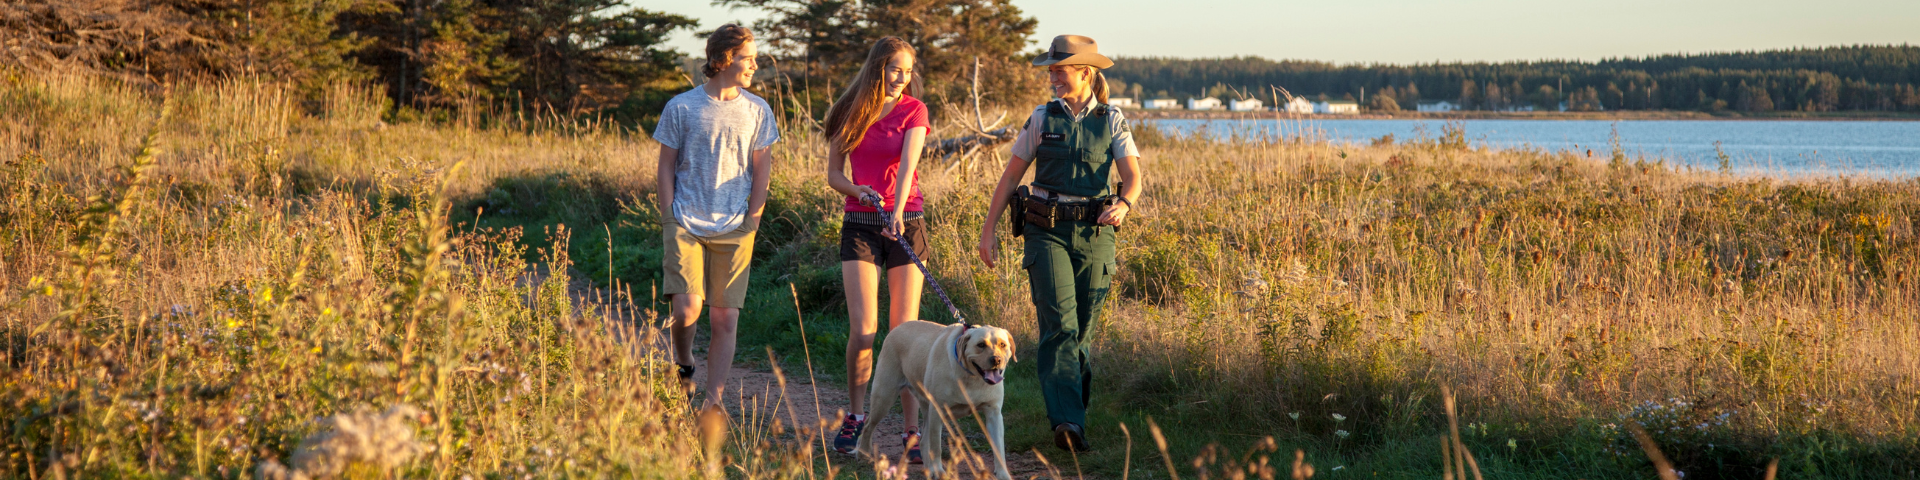 Visitors meet a Park Warden while walking their dog on the trail at Robinsons Island at sunset. Prince Edward Island National Park